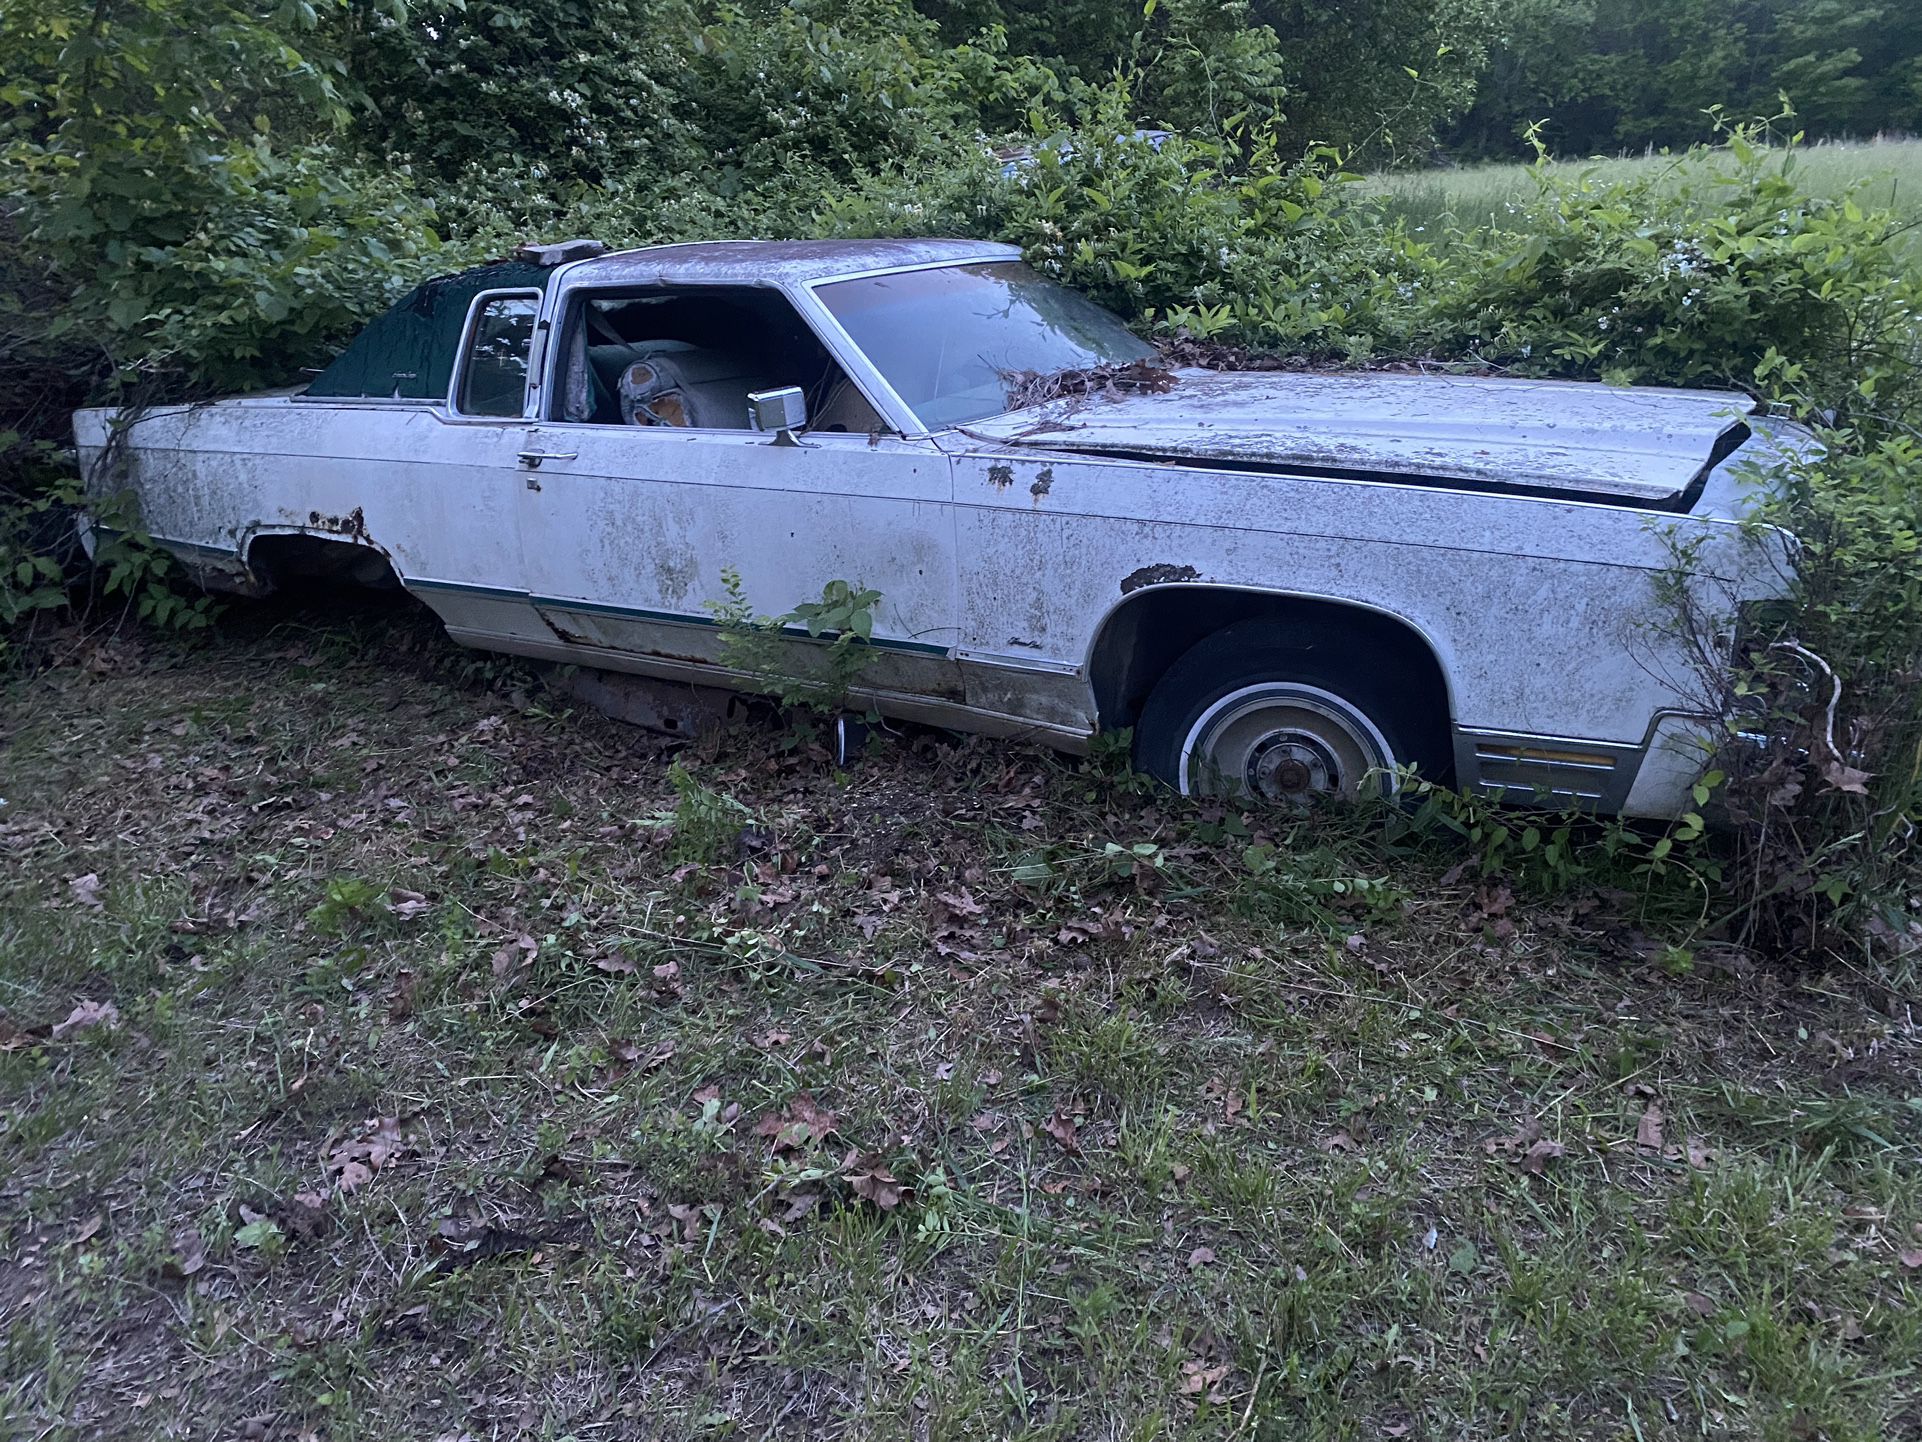 75 Lincoln Parts 